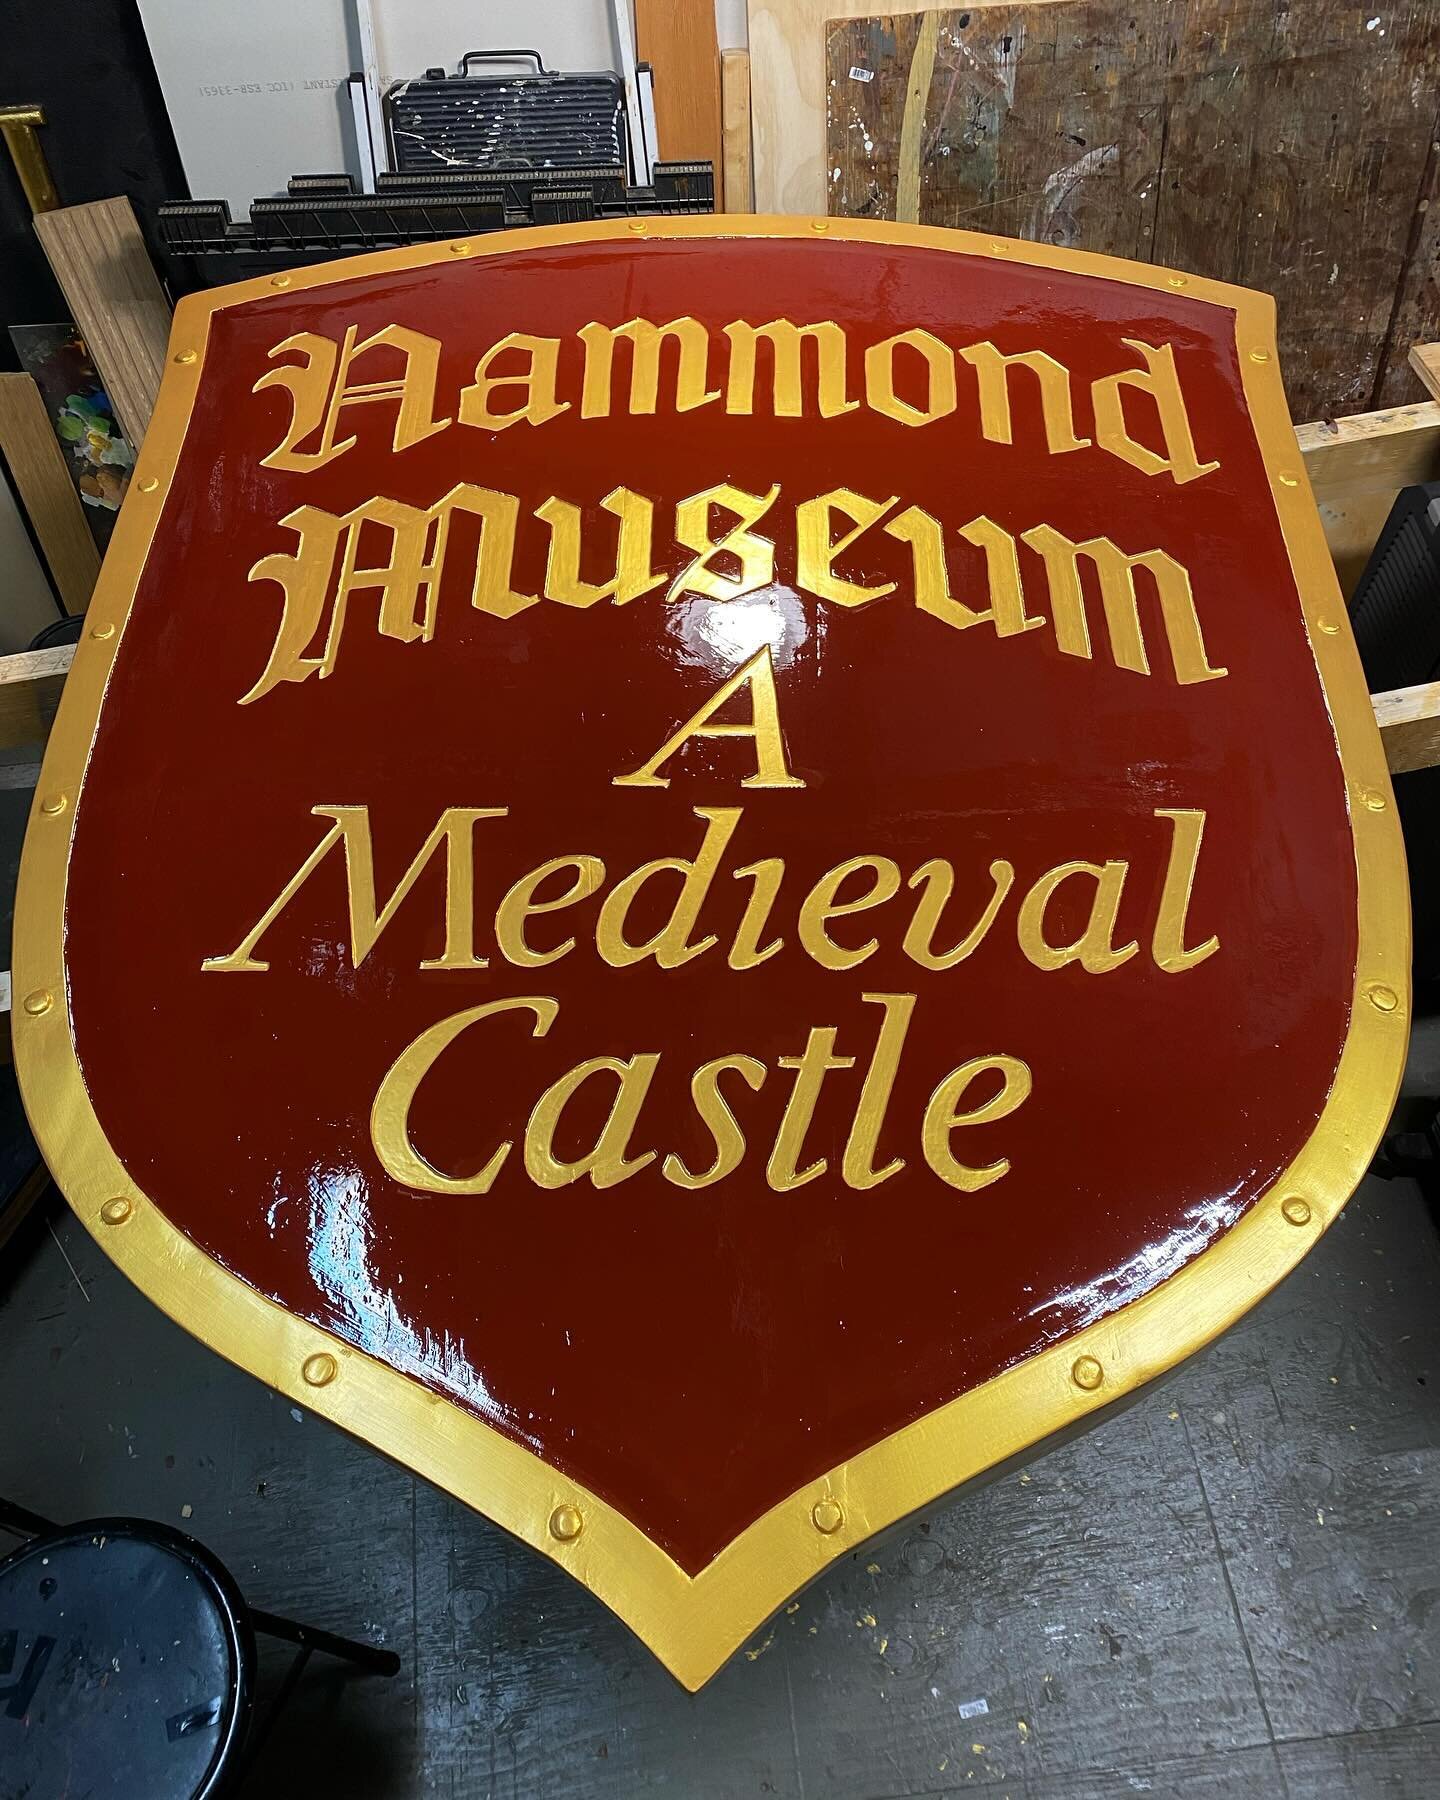 A little &ldquo;After &mdash;&gt; Before&rdquo; sign restoration to brighten your Tuesday morning ✨#dogtownrestoration #hammondcastle #customfinishing #signrestoration #signpainting #historicpreservation #woodsigns #capeann #newengland